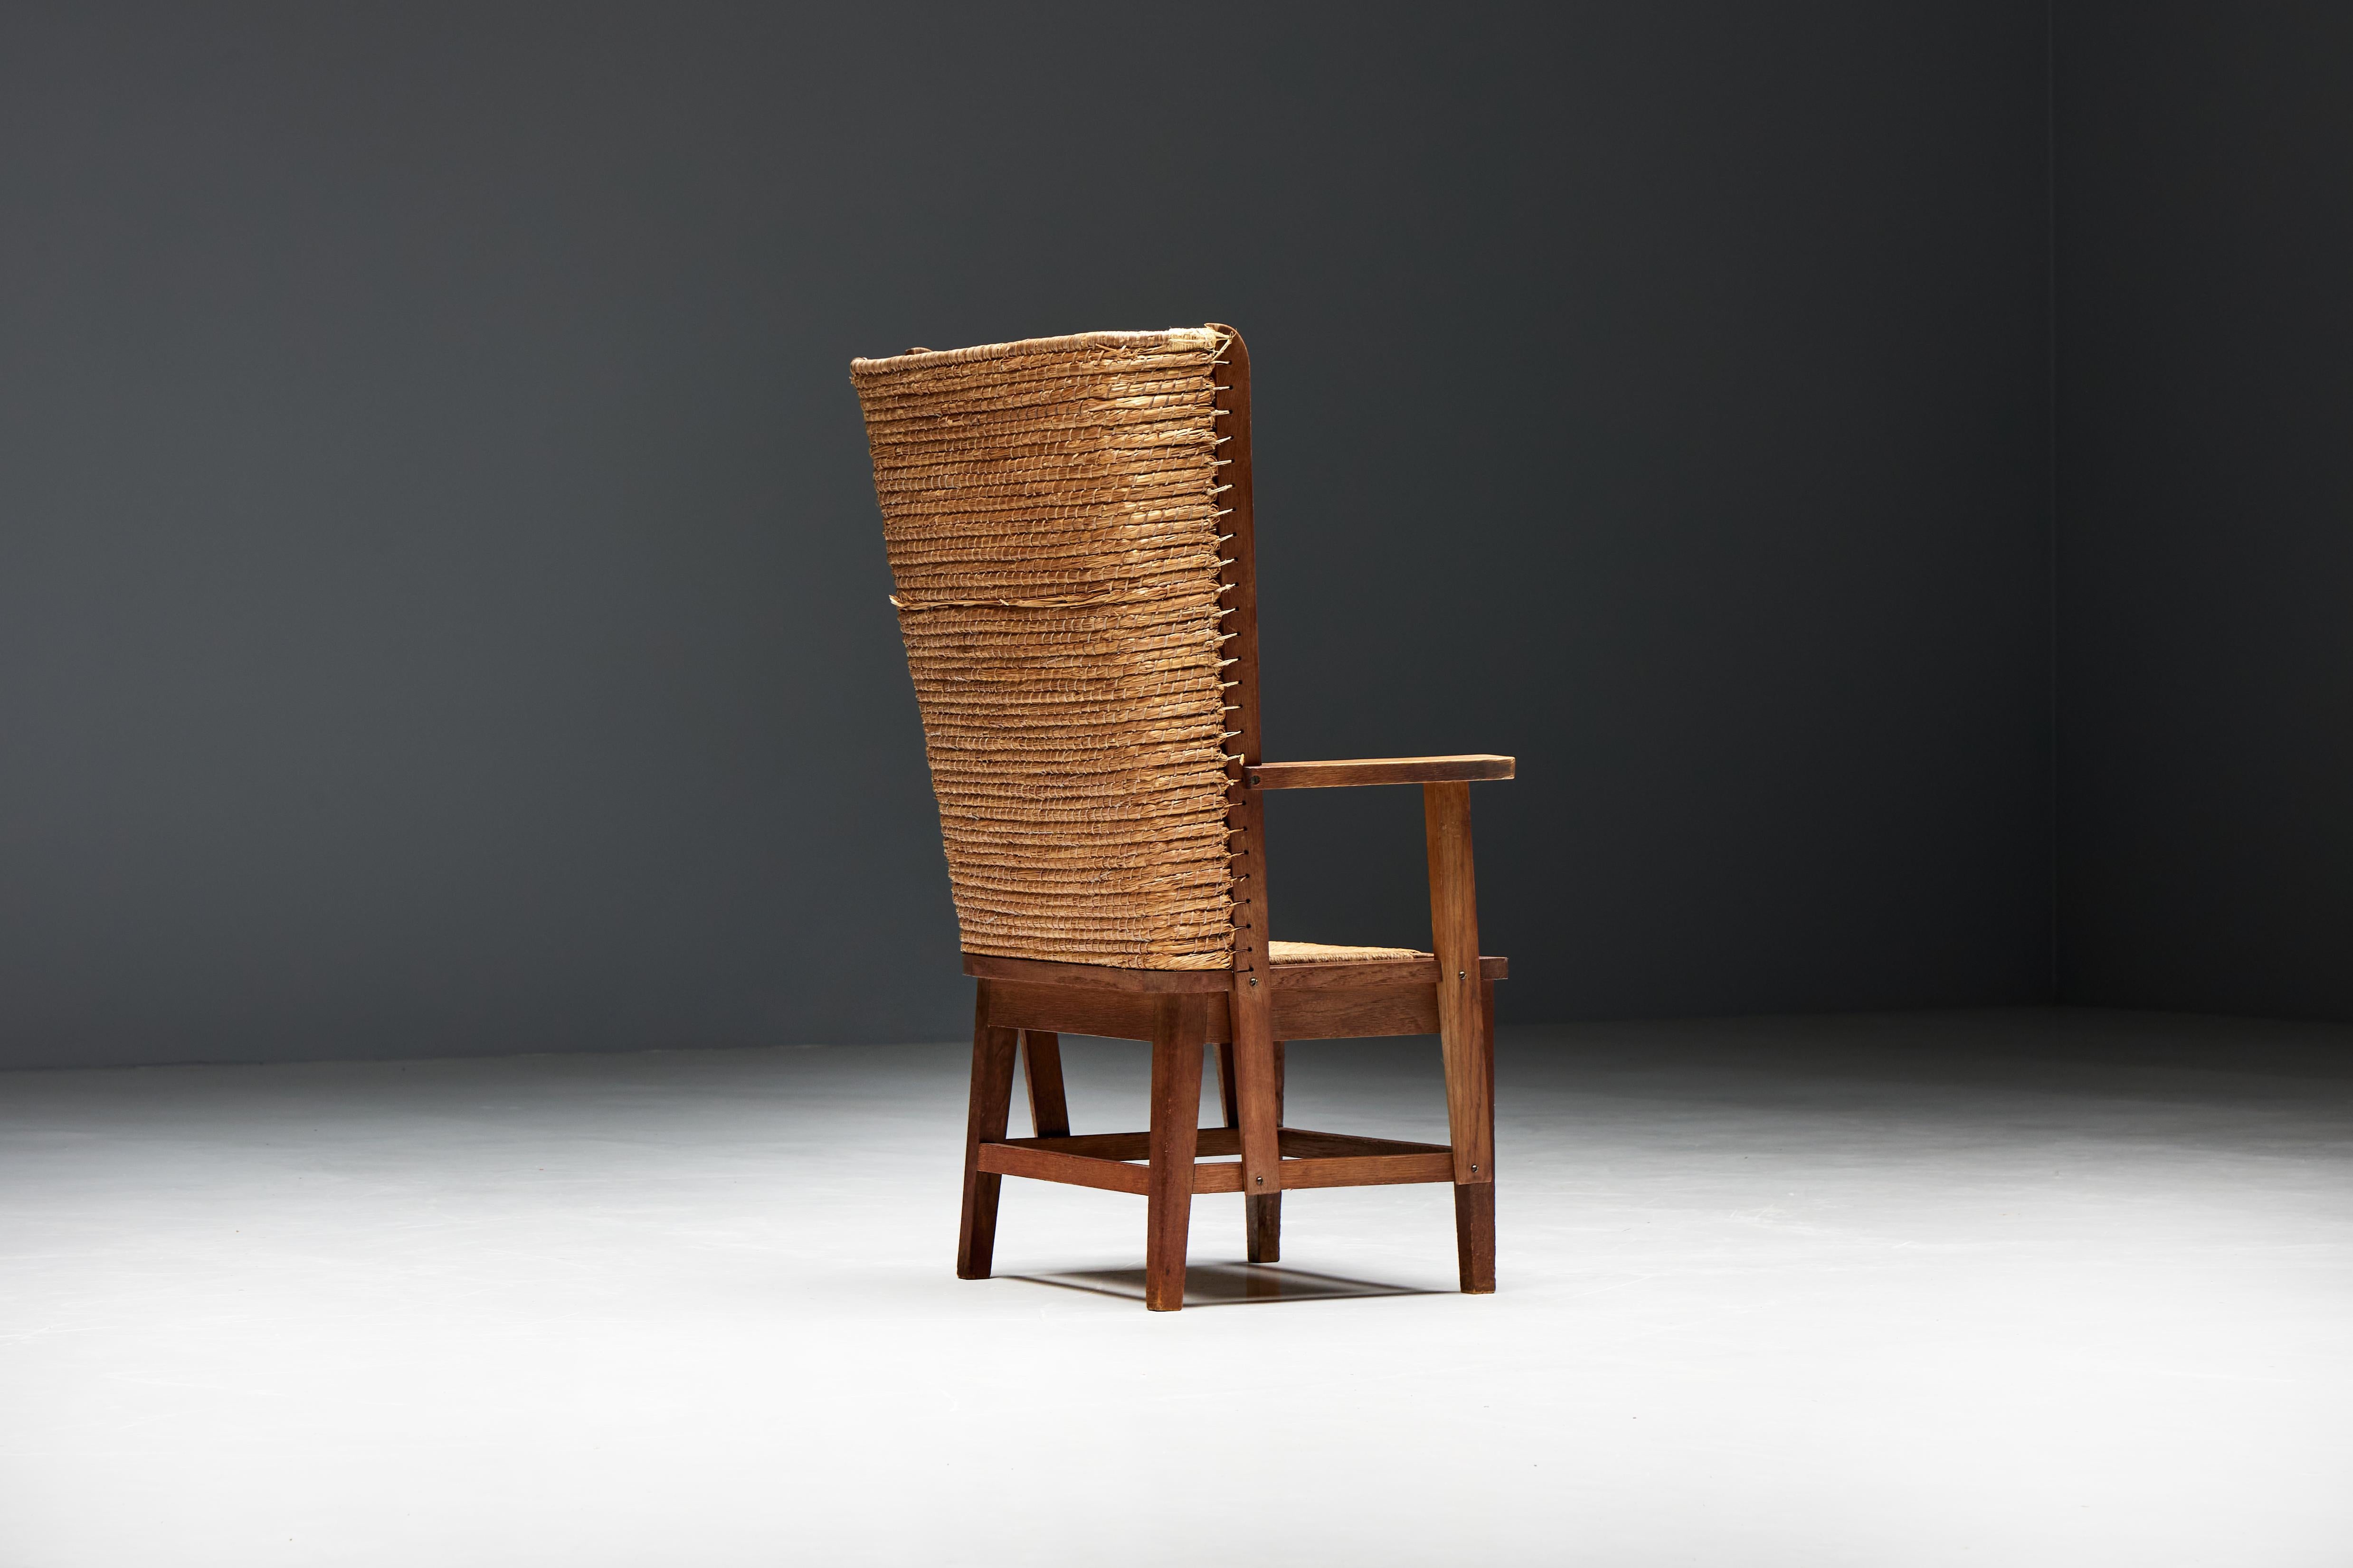 Hand-Carved Orkney Chair in Wood and Oat Straw, Scotland, 19th Century For Sale